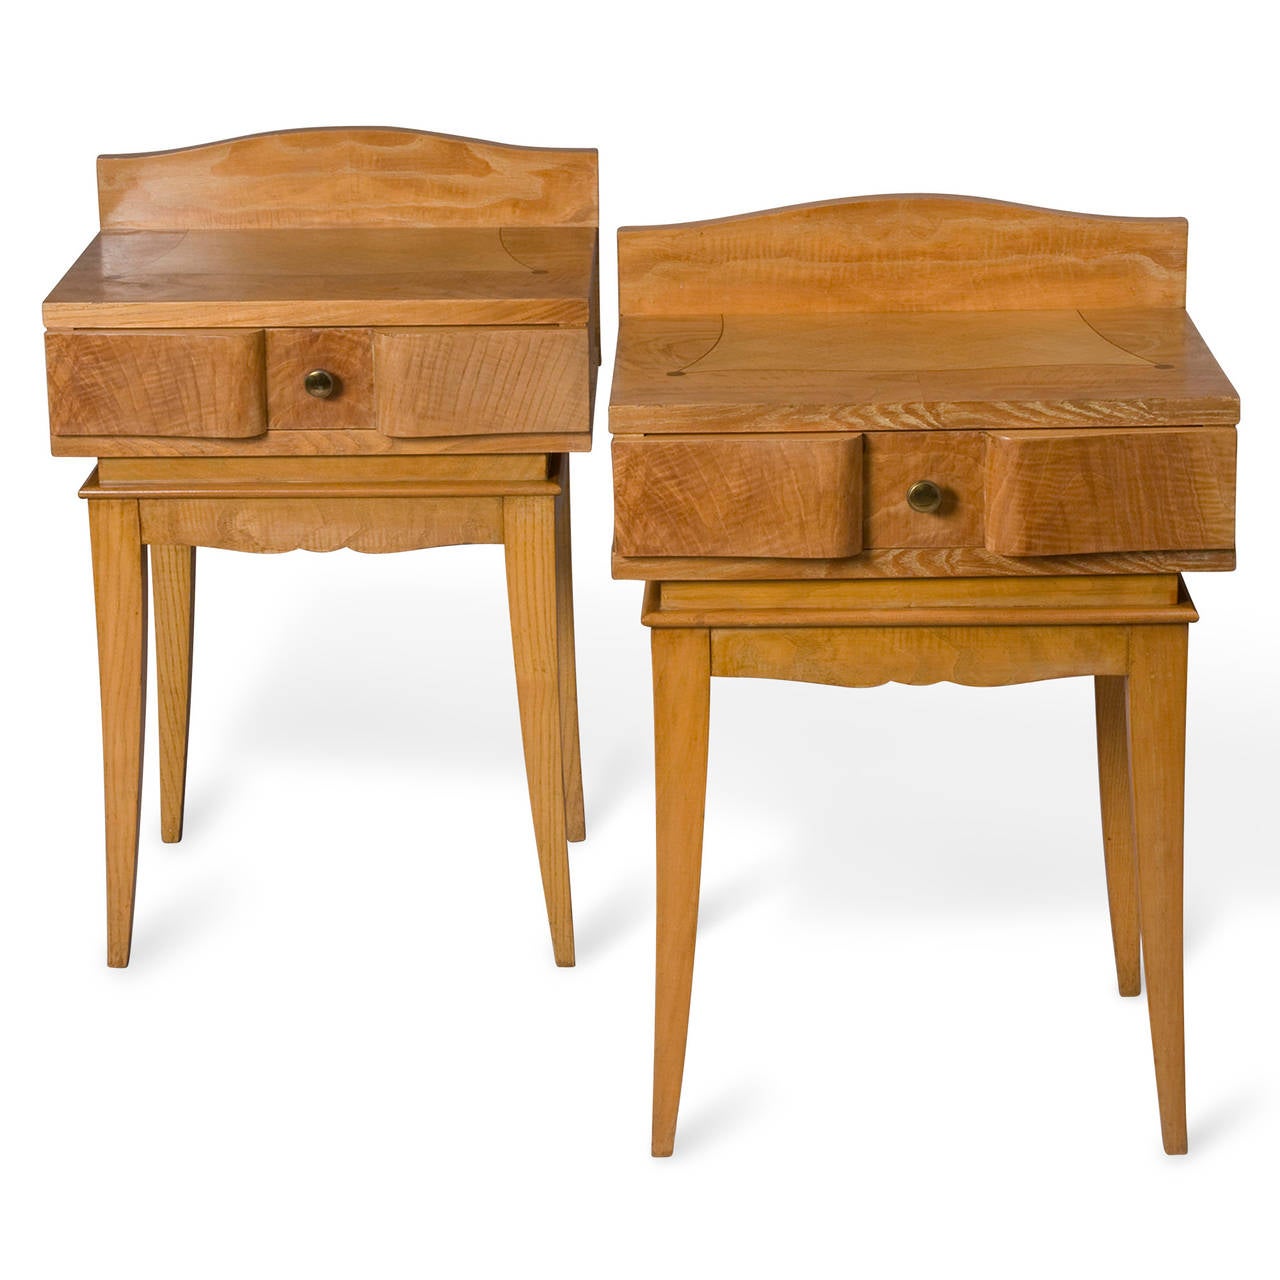 Pair of single drawer oak bedside tables, with gracefully curving front face, apron and back, the legs tapered and slightly arcing outward, the drawers felt lined and the surface having checkerboard 